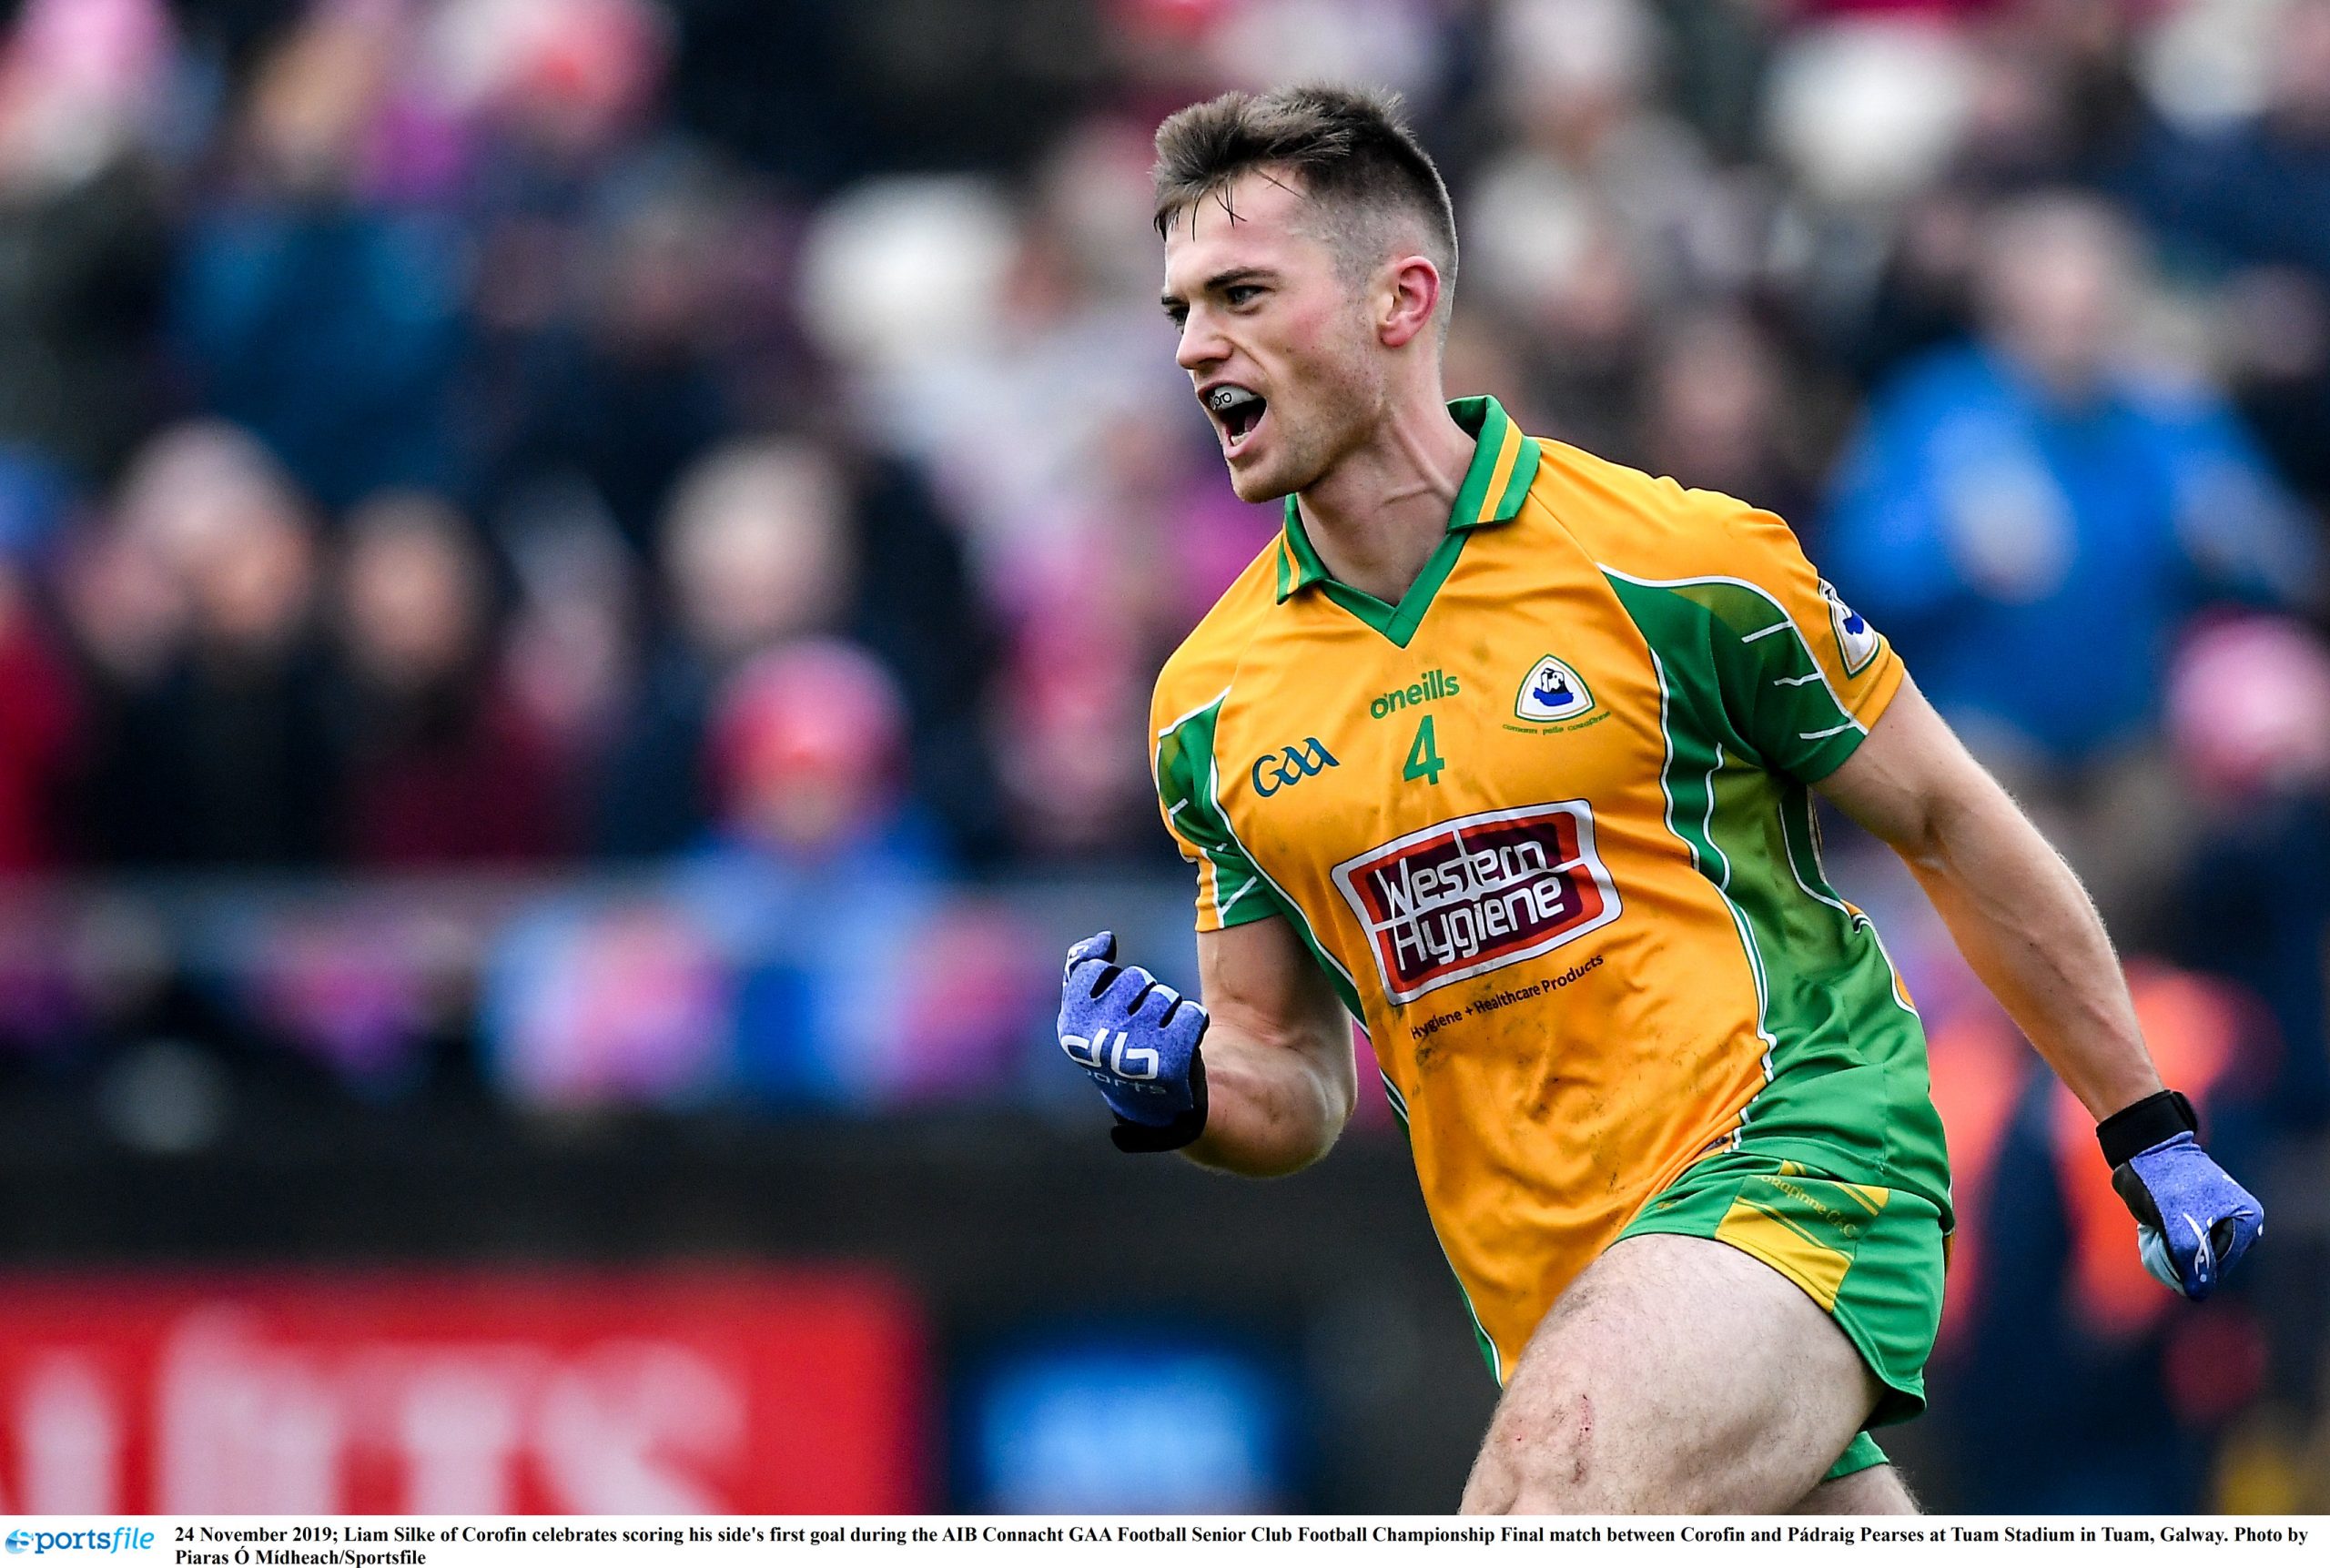 Four in a Row for Corofin!